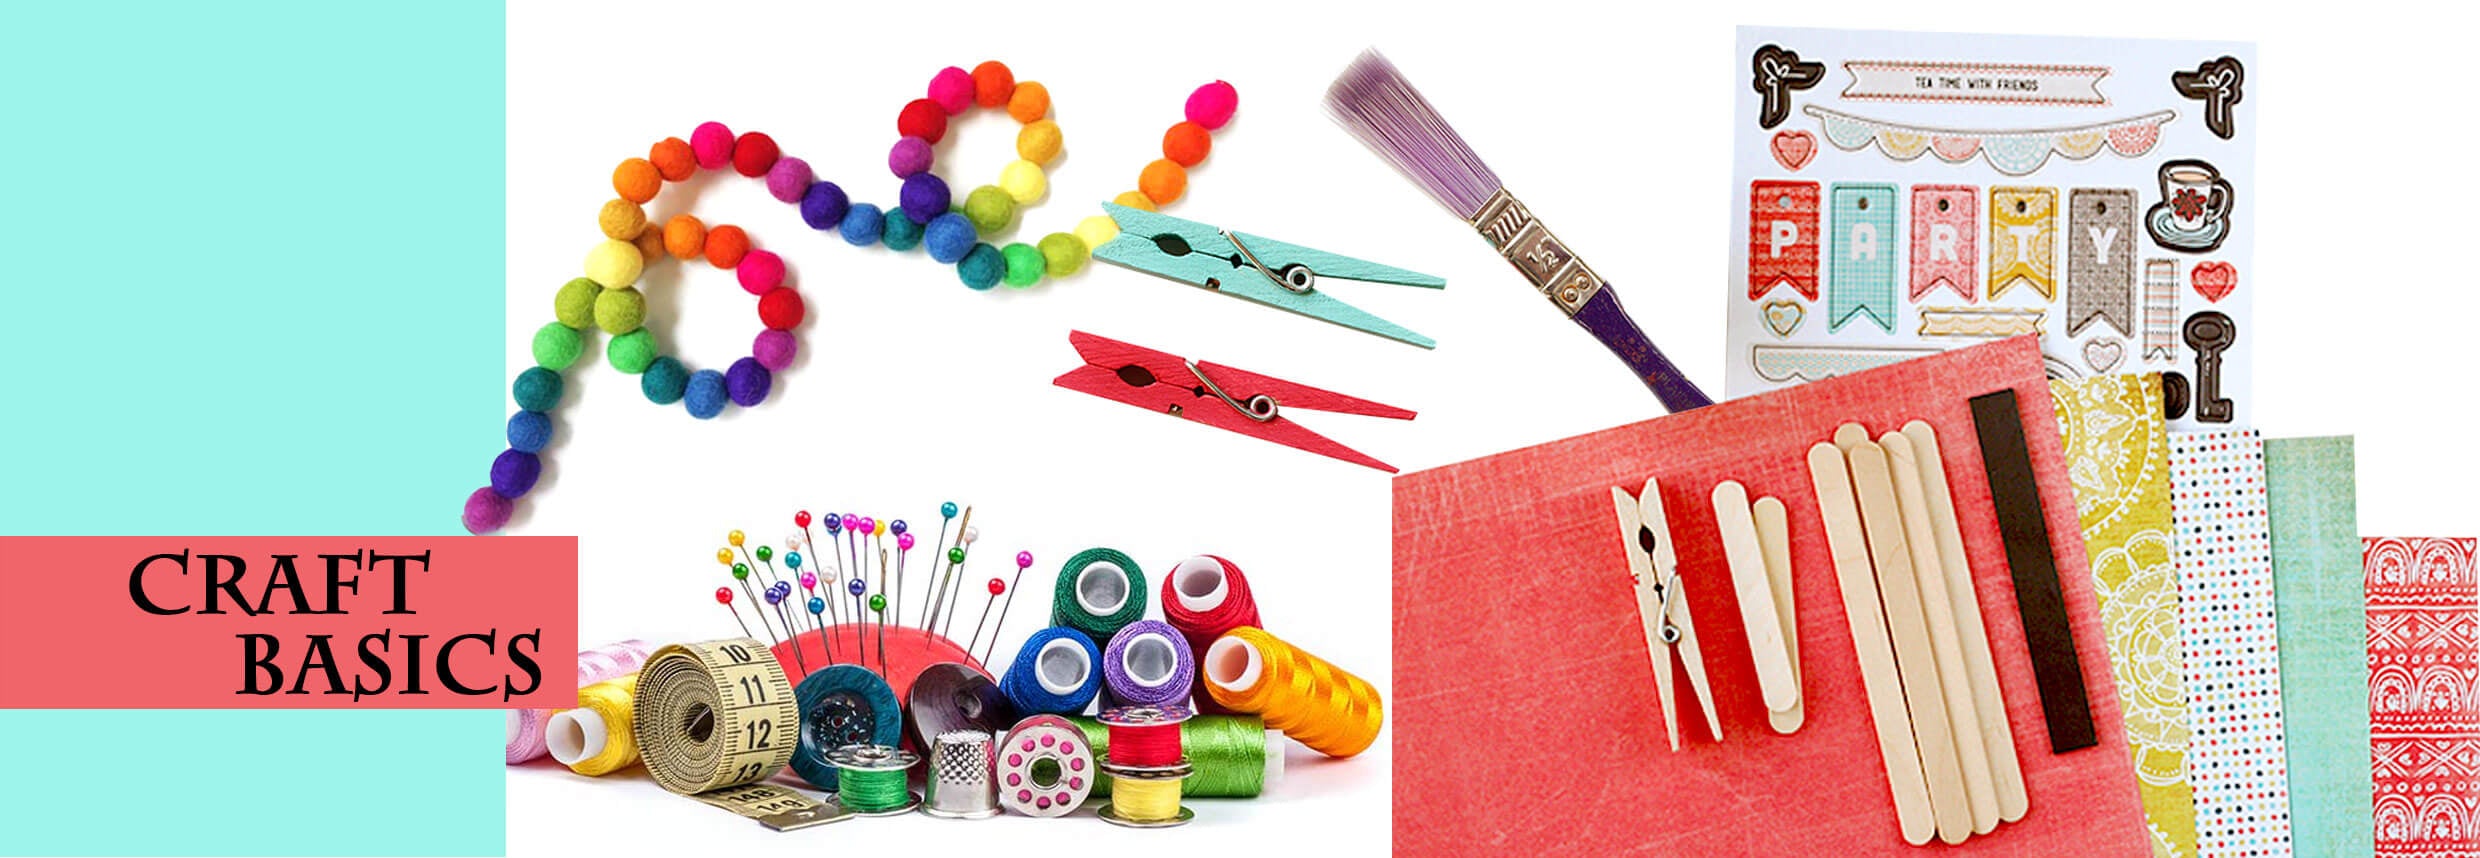 Shop Arts, Crafts and Sewing - Arts, Crafts & Sewing Products Online in  Dubai, United Arab Emirates - UNI59932340